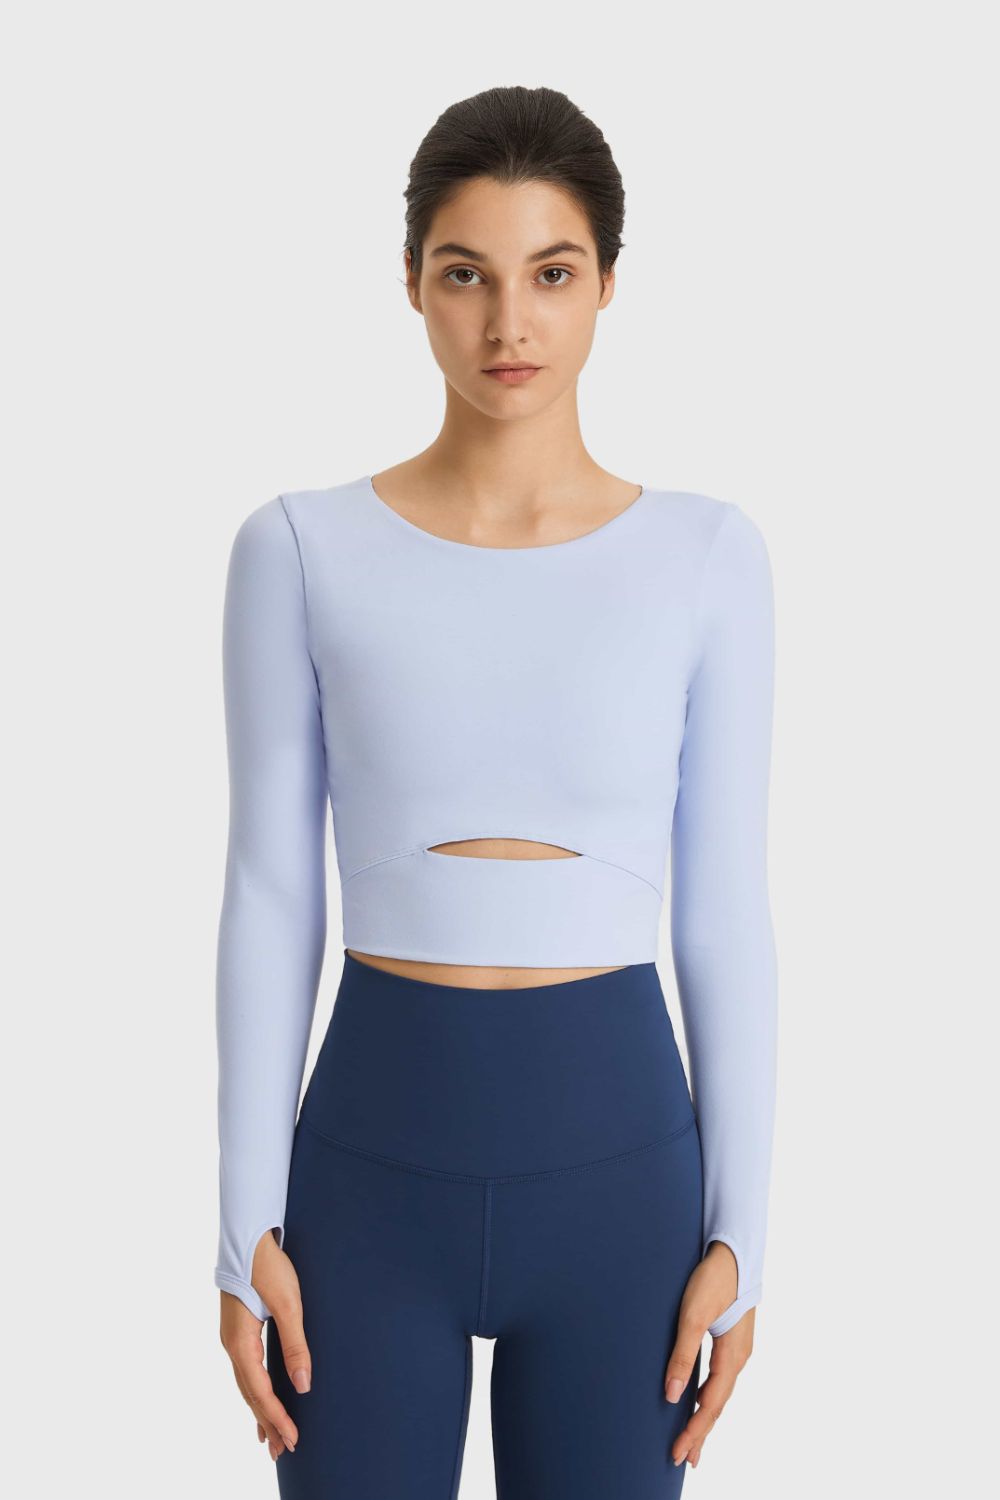 Cutout Long Sleeve Cropped Sports Top - Crop Tops & Tank Tops - FITGGINS